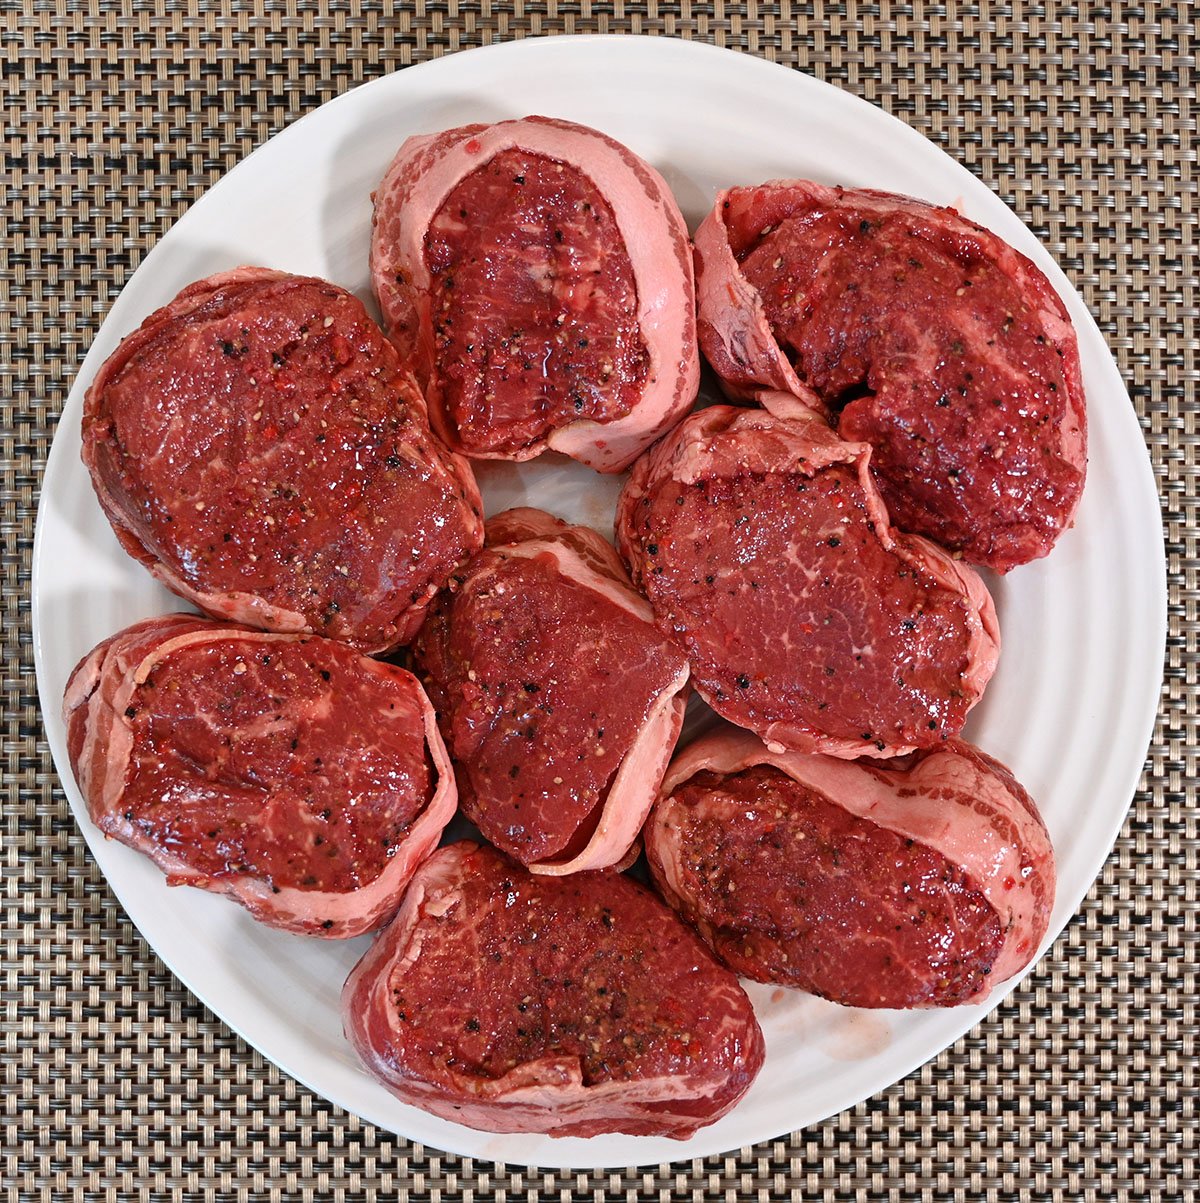 Image of a plate of raw beef tournedos from Costco ready to be cooked. 